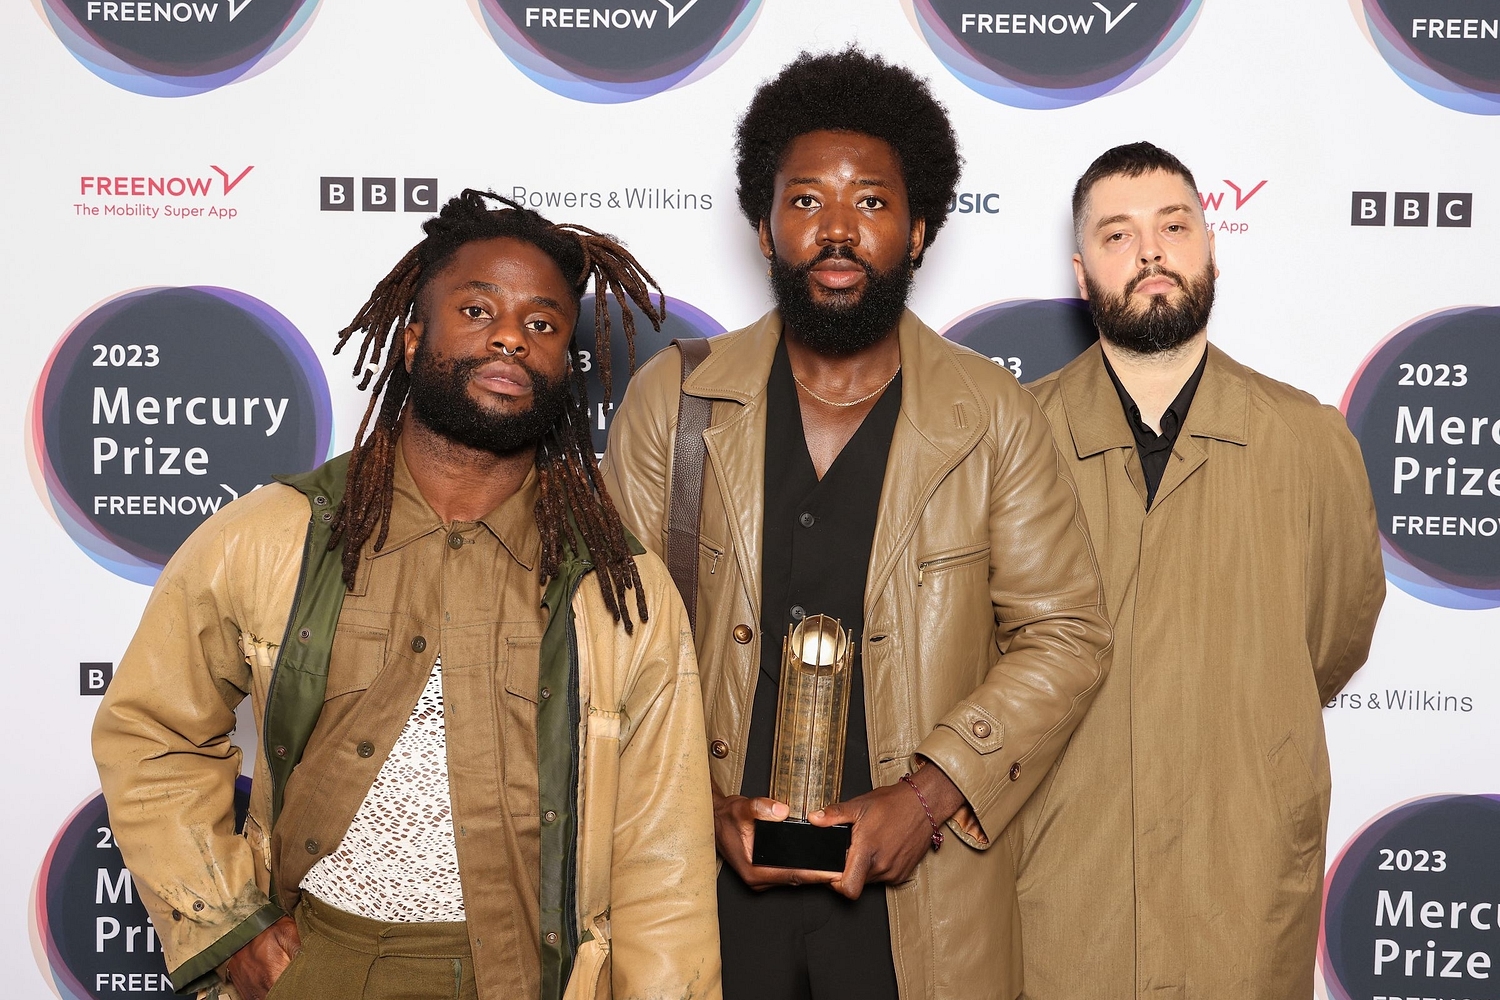 Performers announced for 2023’s Mercury Prize ceremony